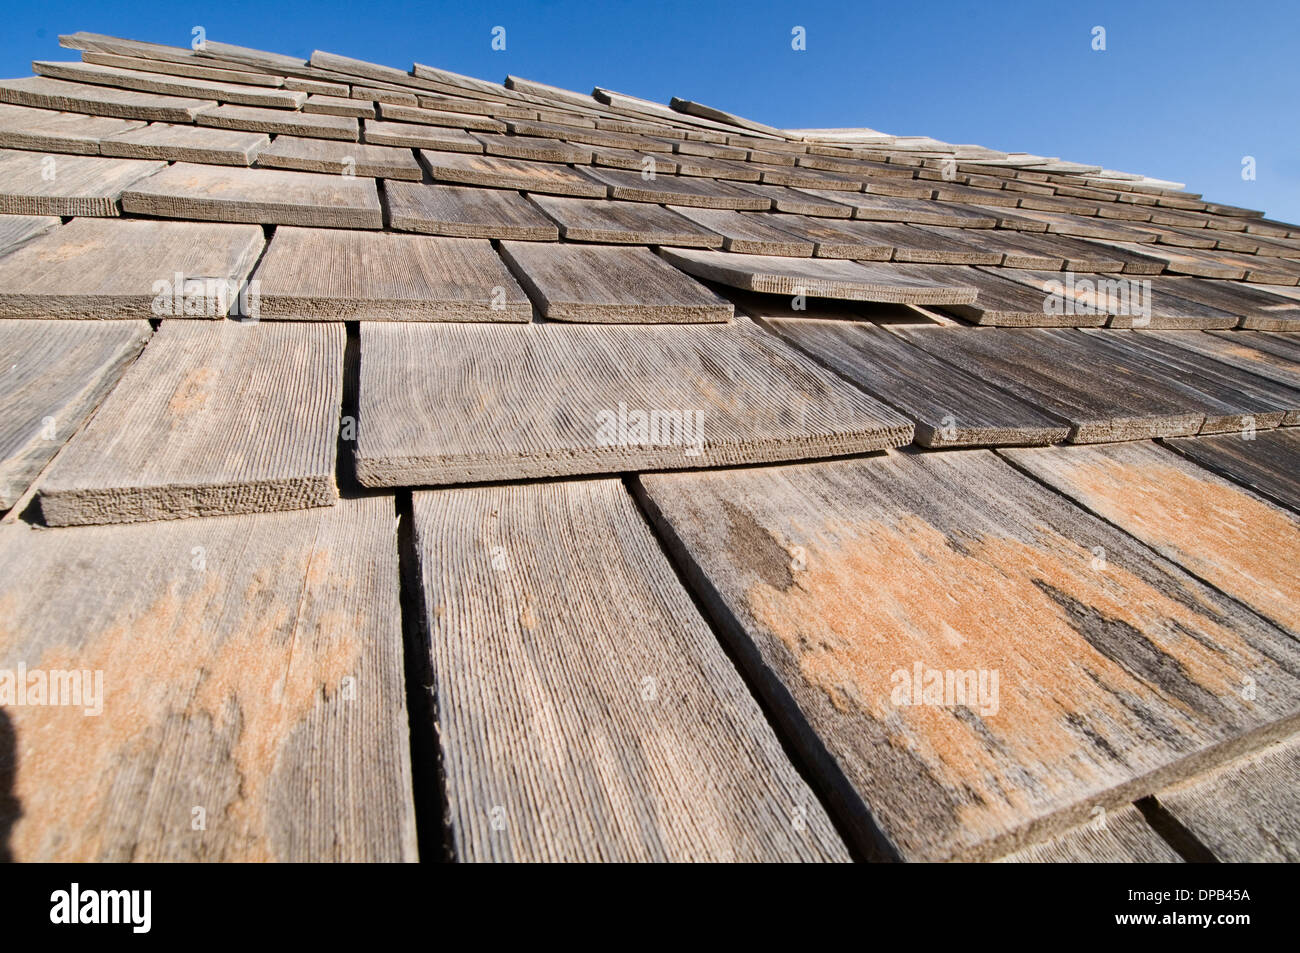 wood shingles roof roofs tiles tile wooden traditional overlap overlapping wooden Stock Photo